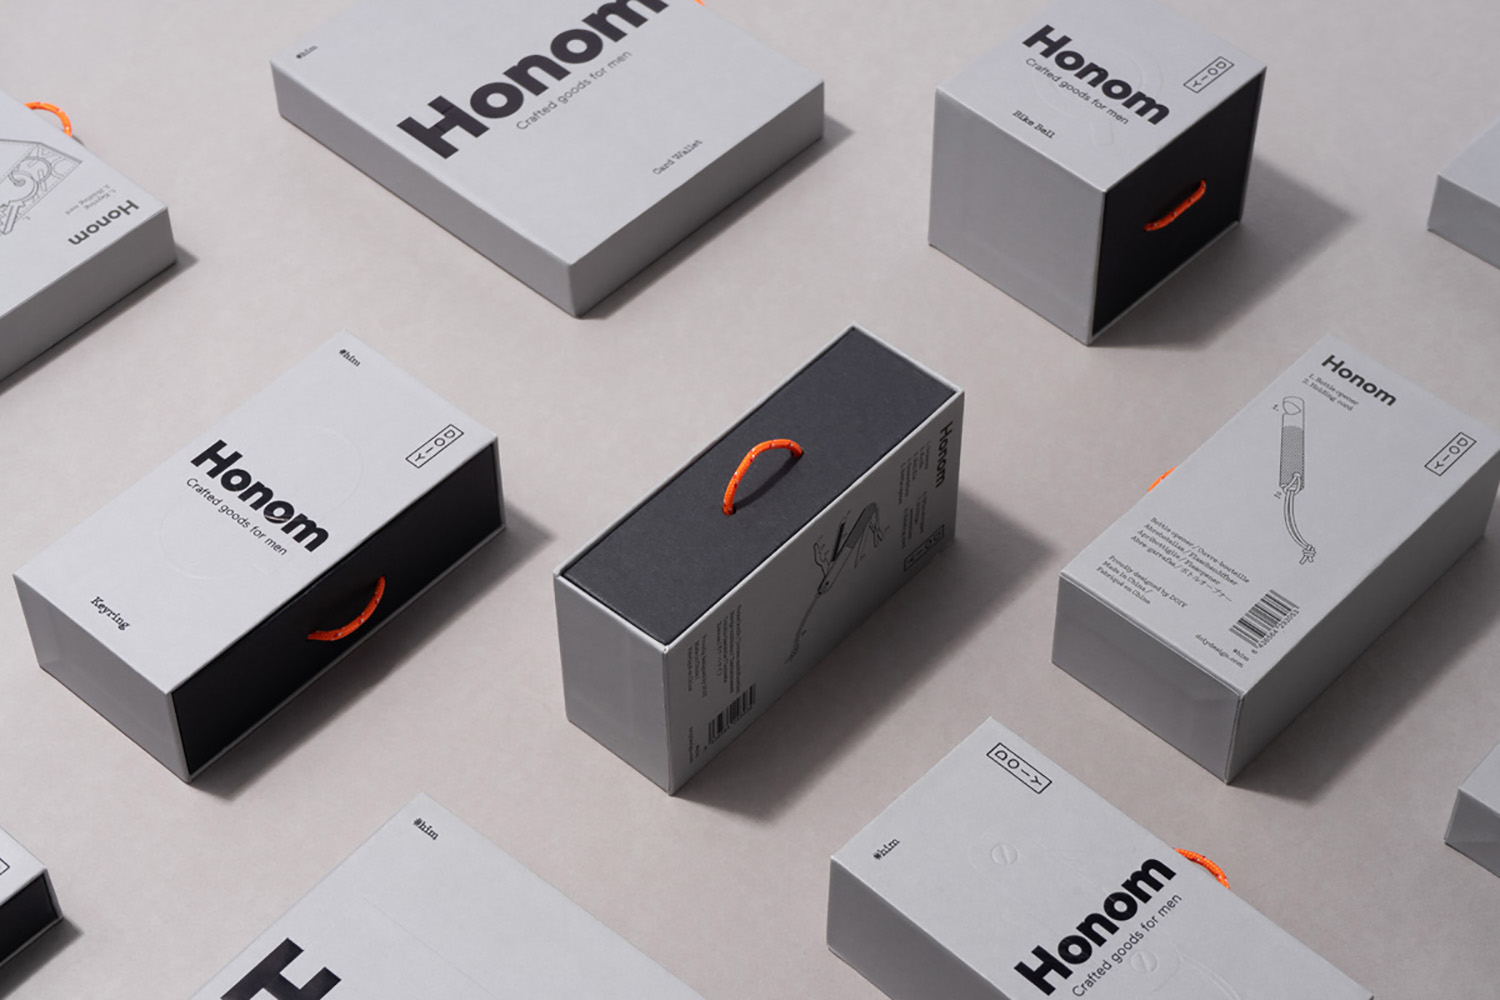 Visual identity and packaging design by Folch for Honom, DOIY's new range of products for men